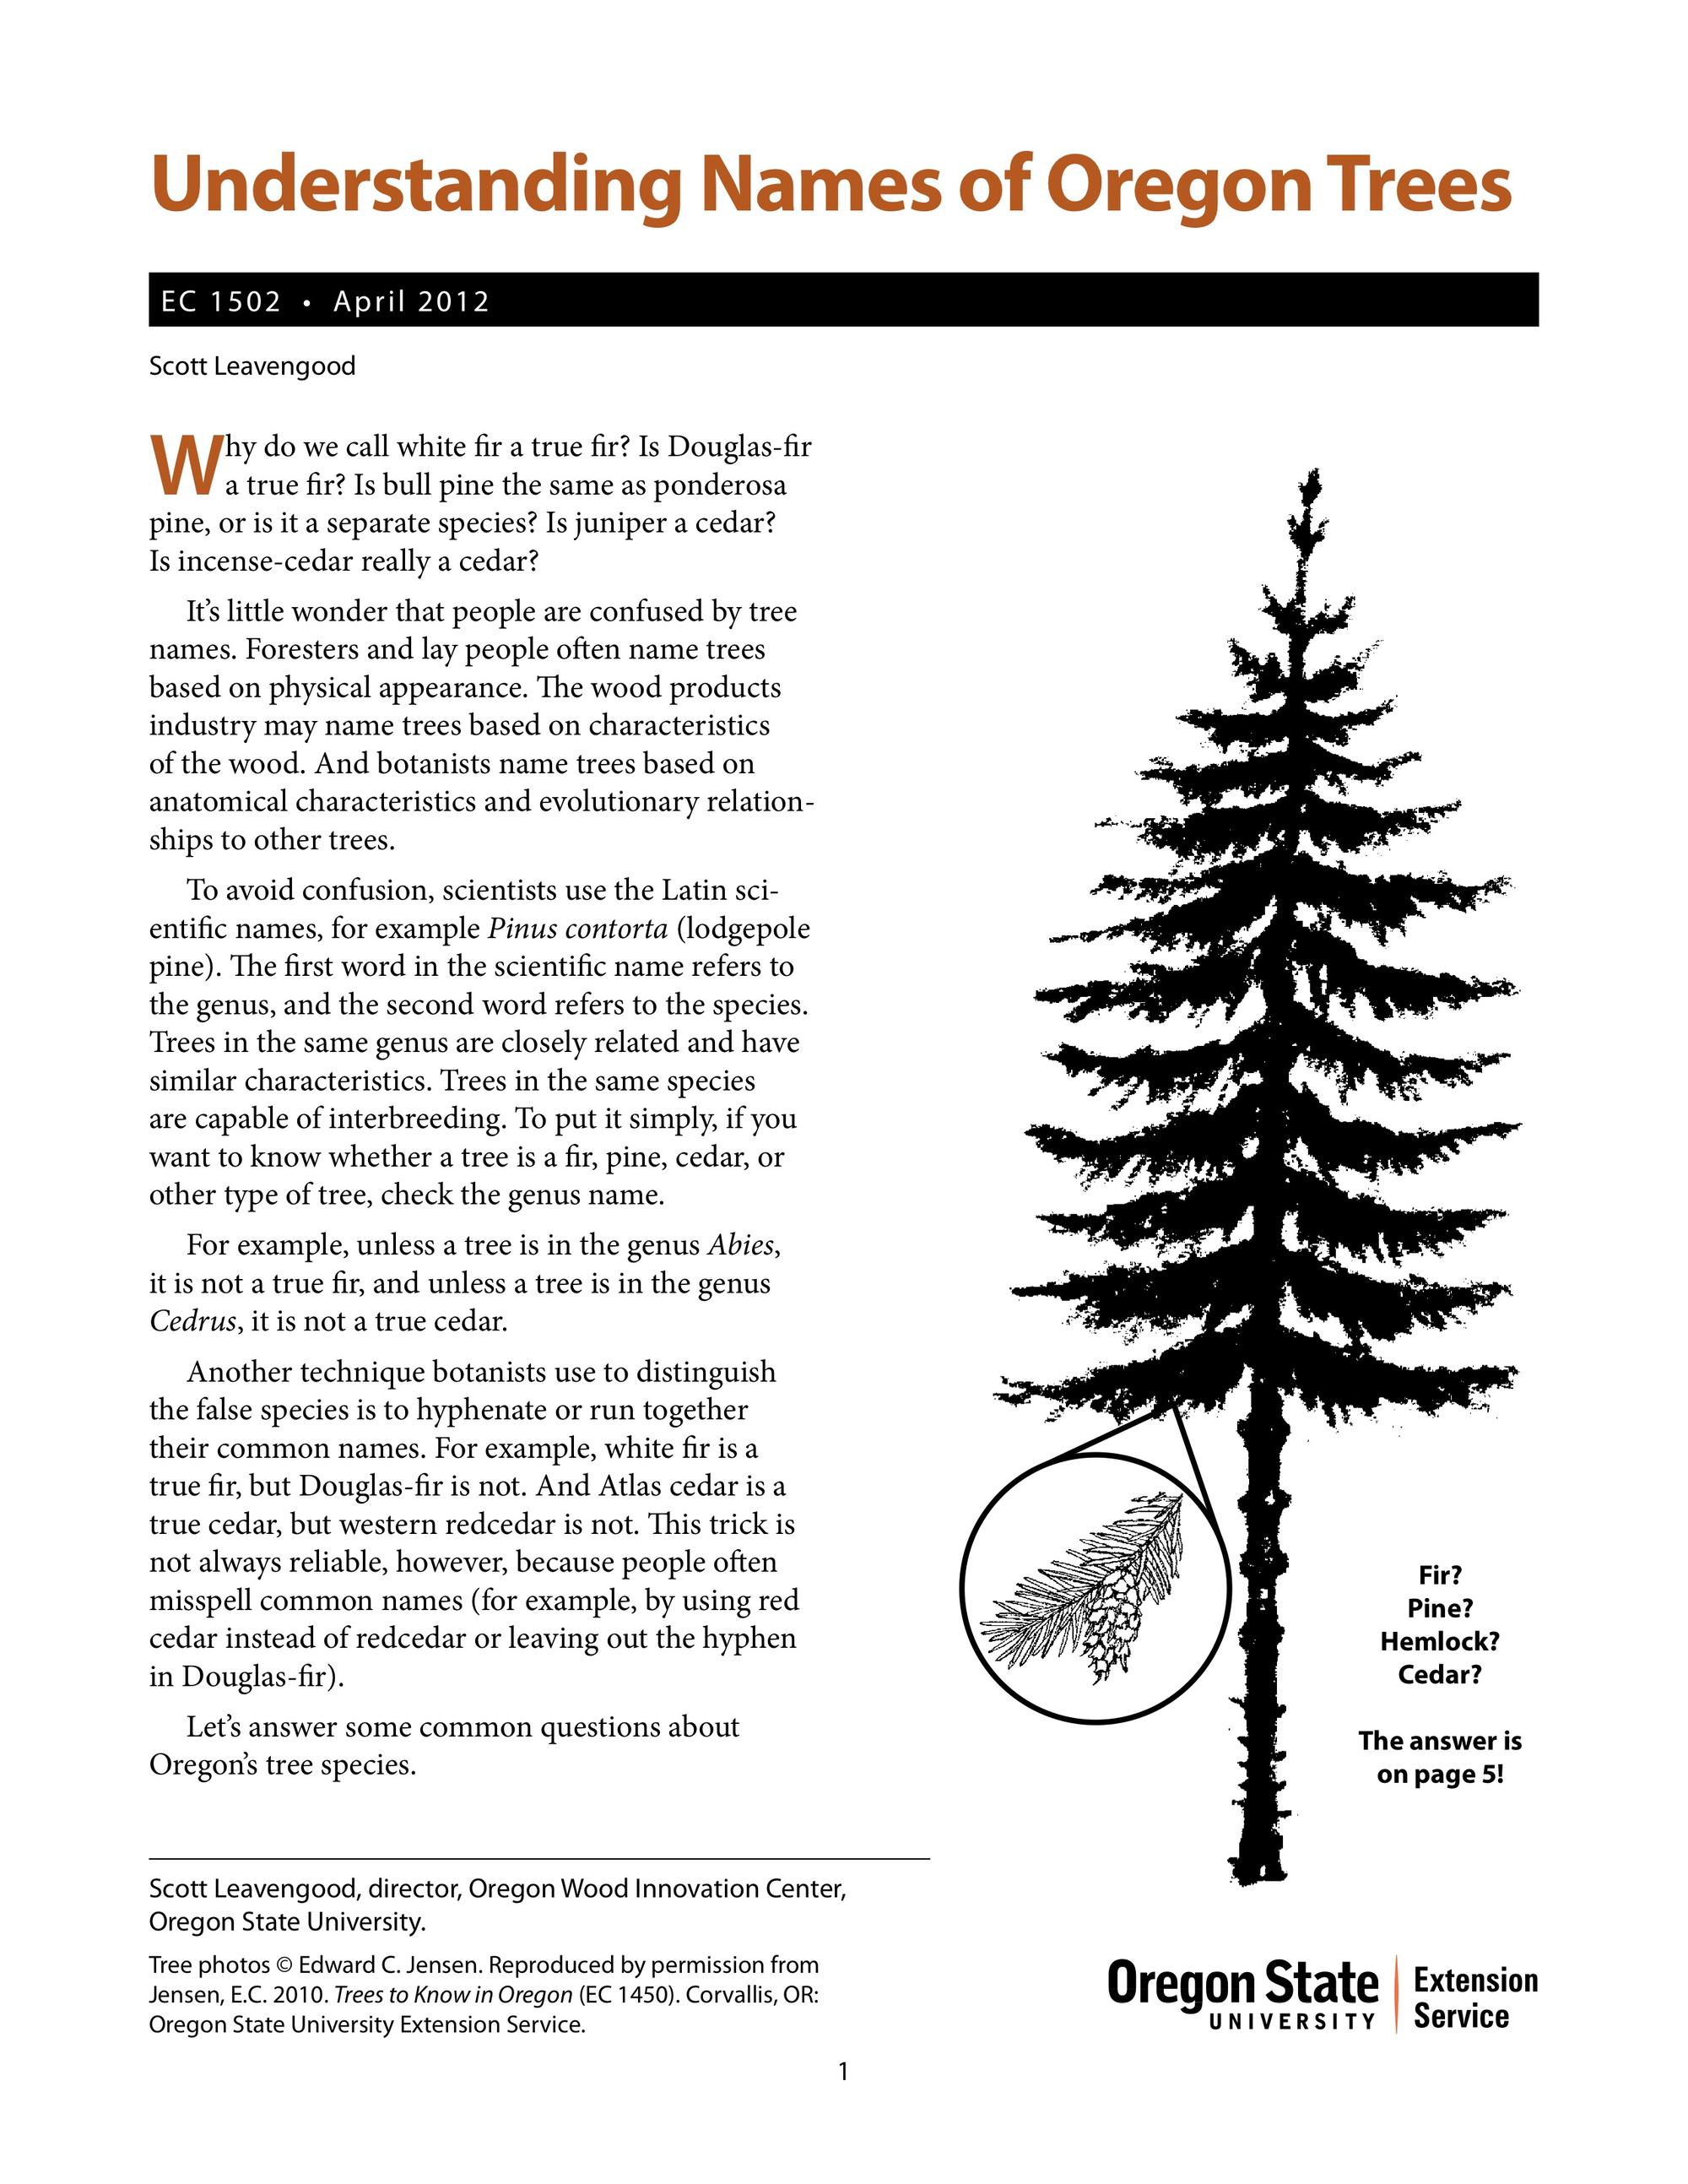 Understanding Names of Oregon Trees OSU Extension Service